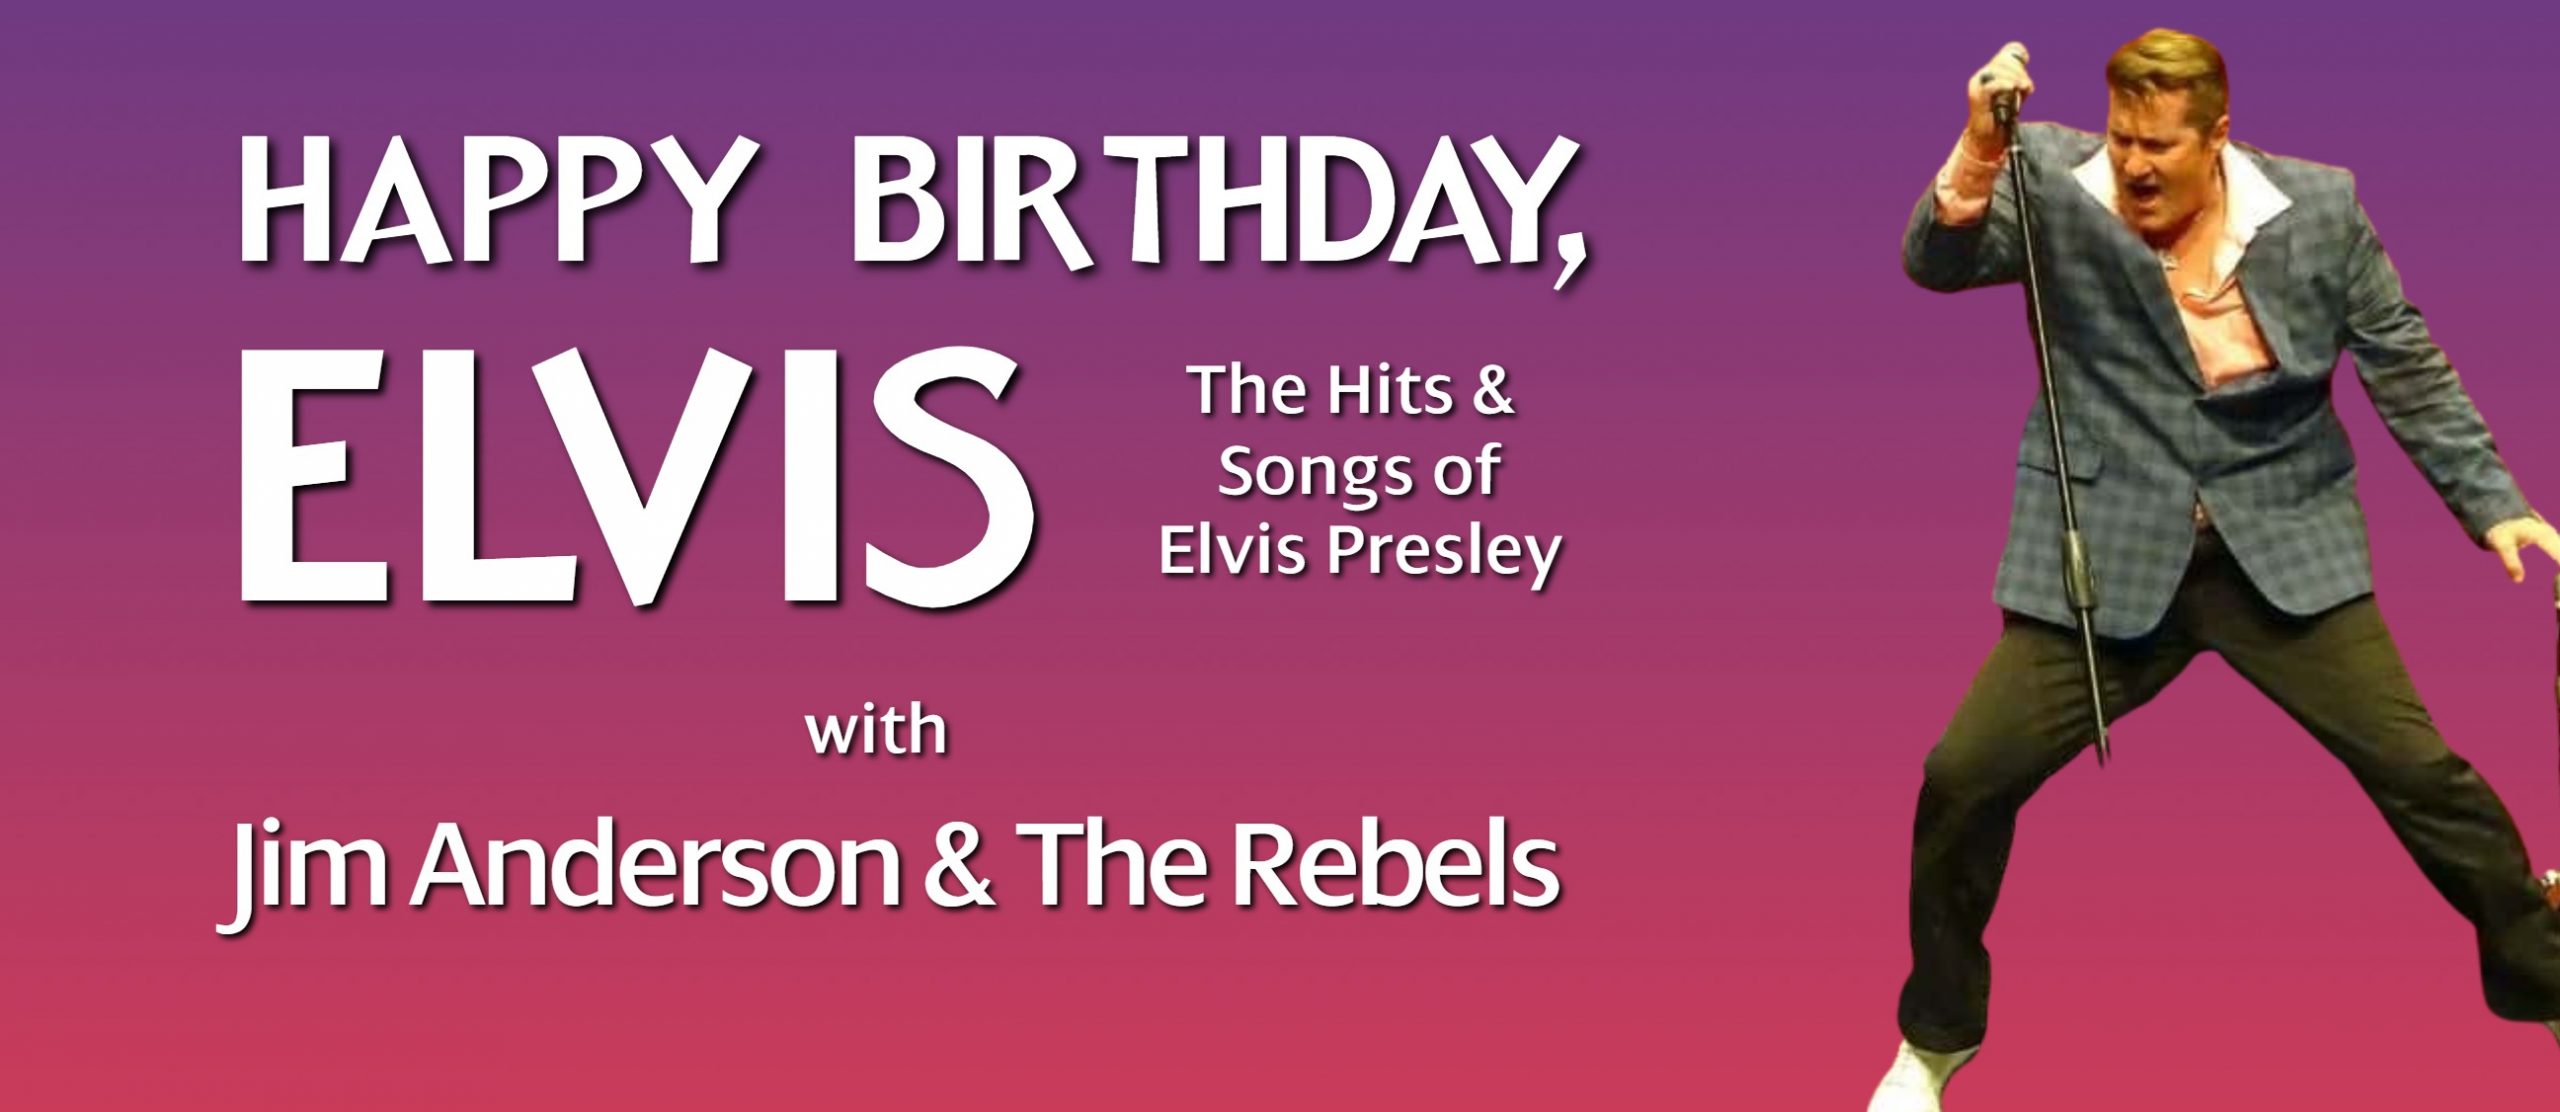 "Happy Birthday, Elvis" with Jim Anderson & The Rebels